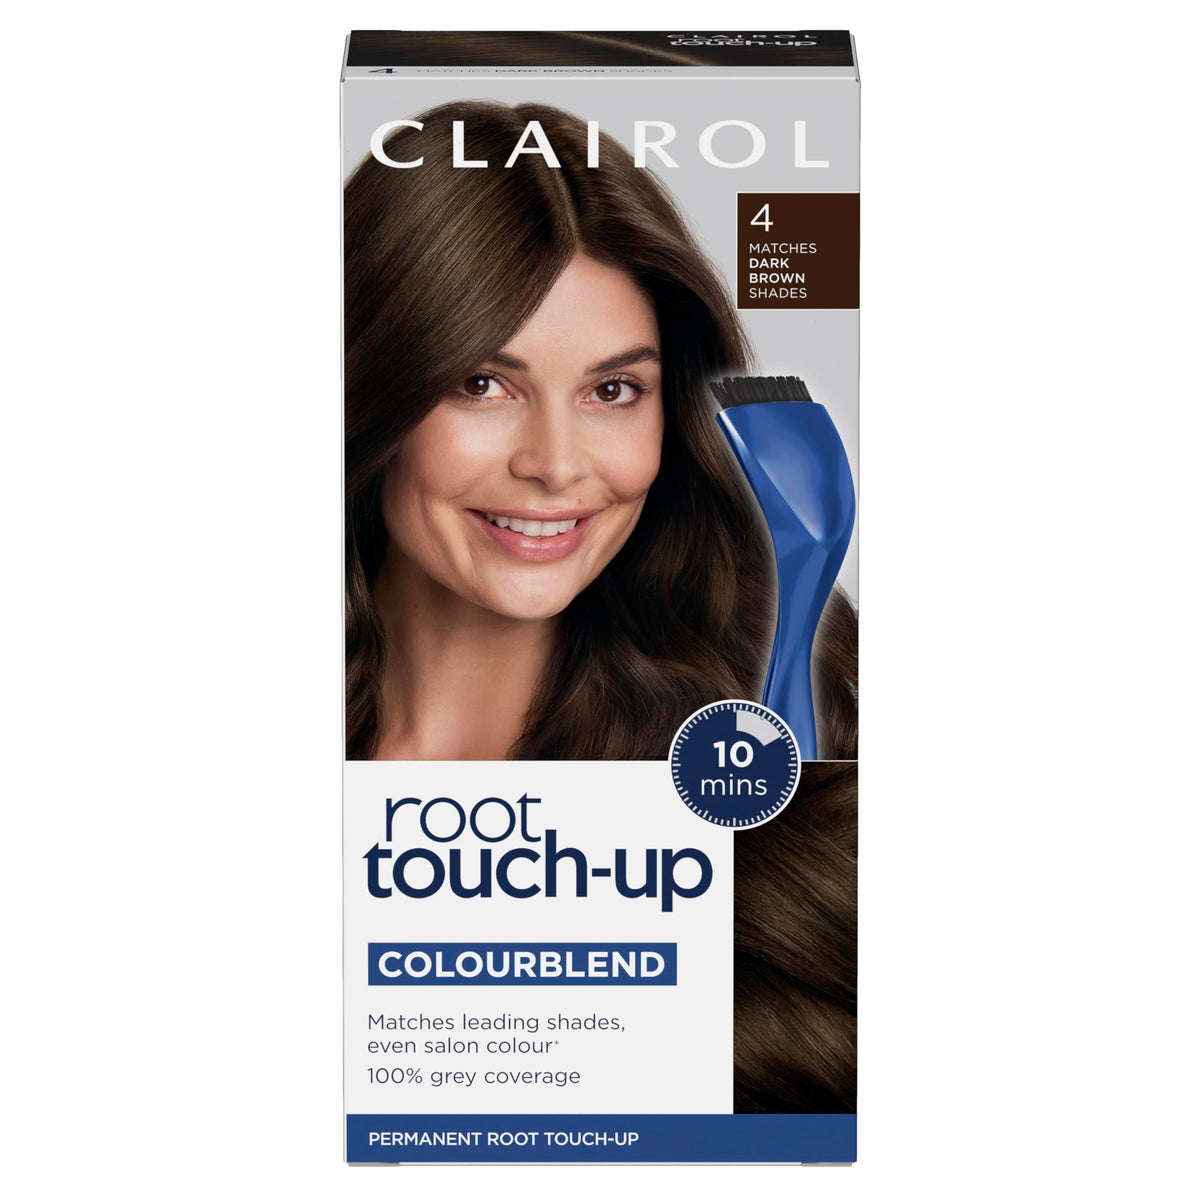 Clairol Root Touch-Up Permanent Hair Dye, 4 Dark Brown (Packing May Vary)